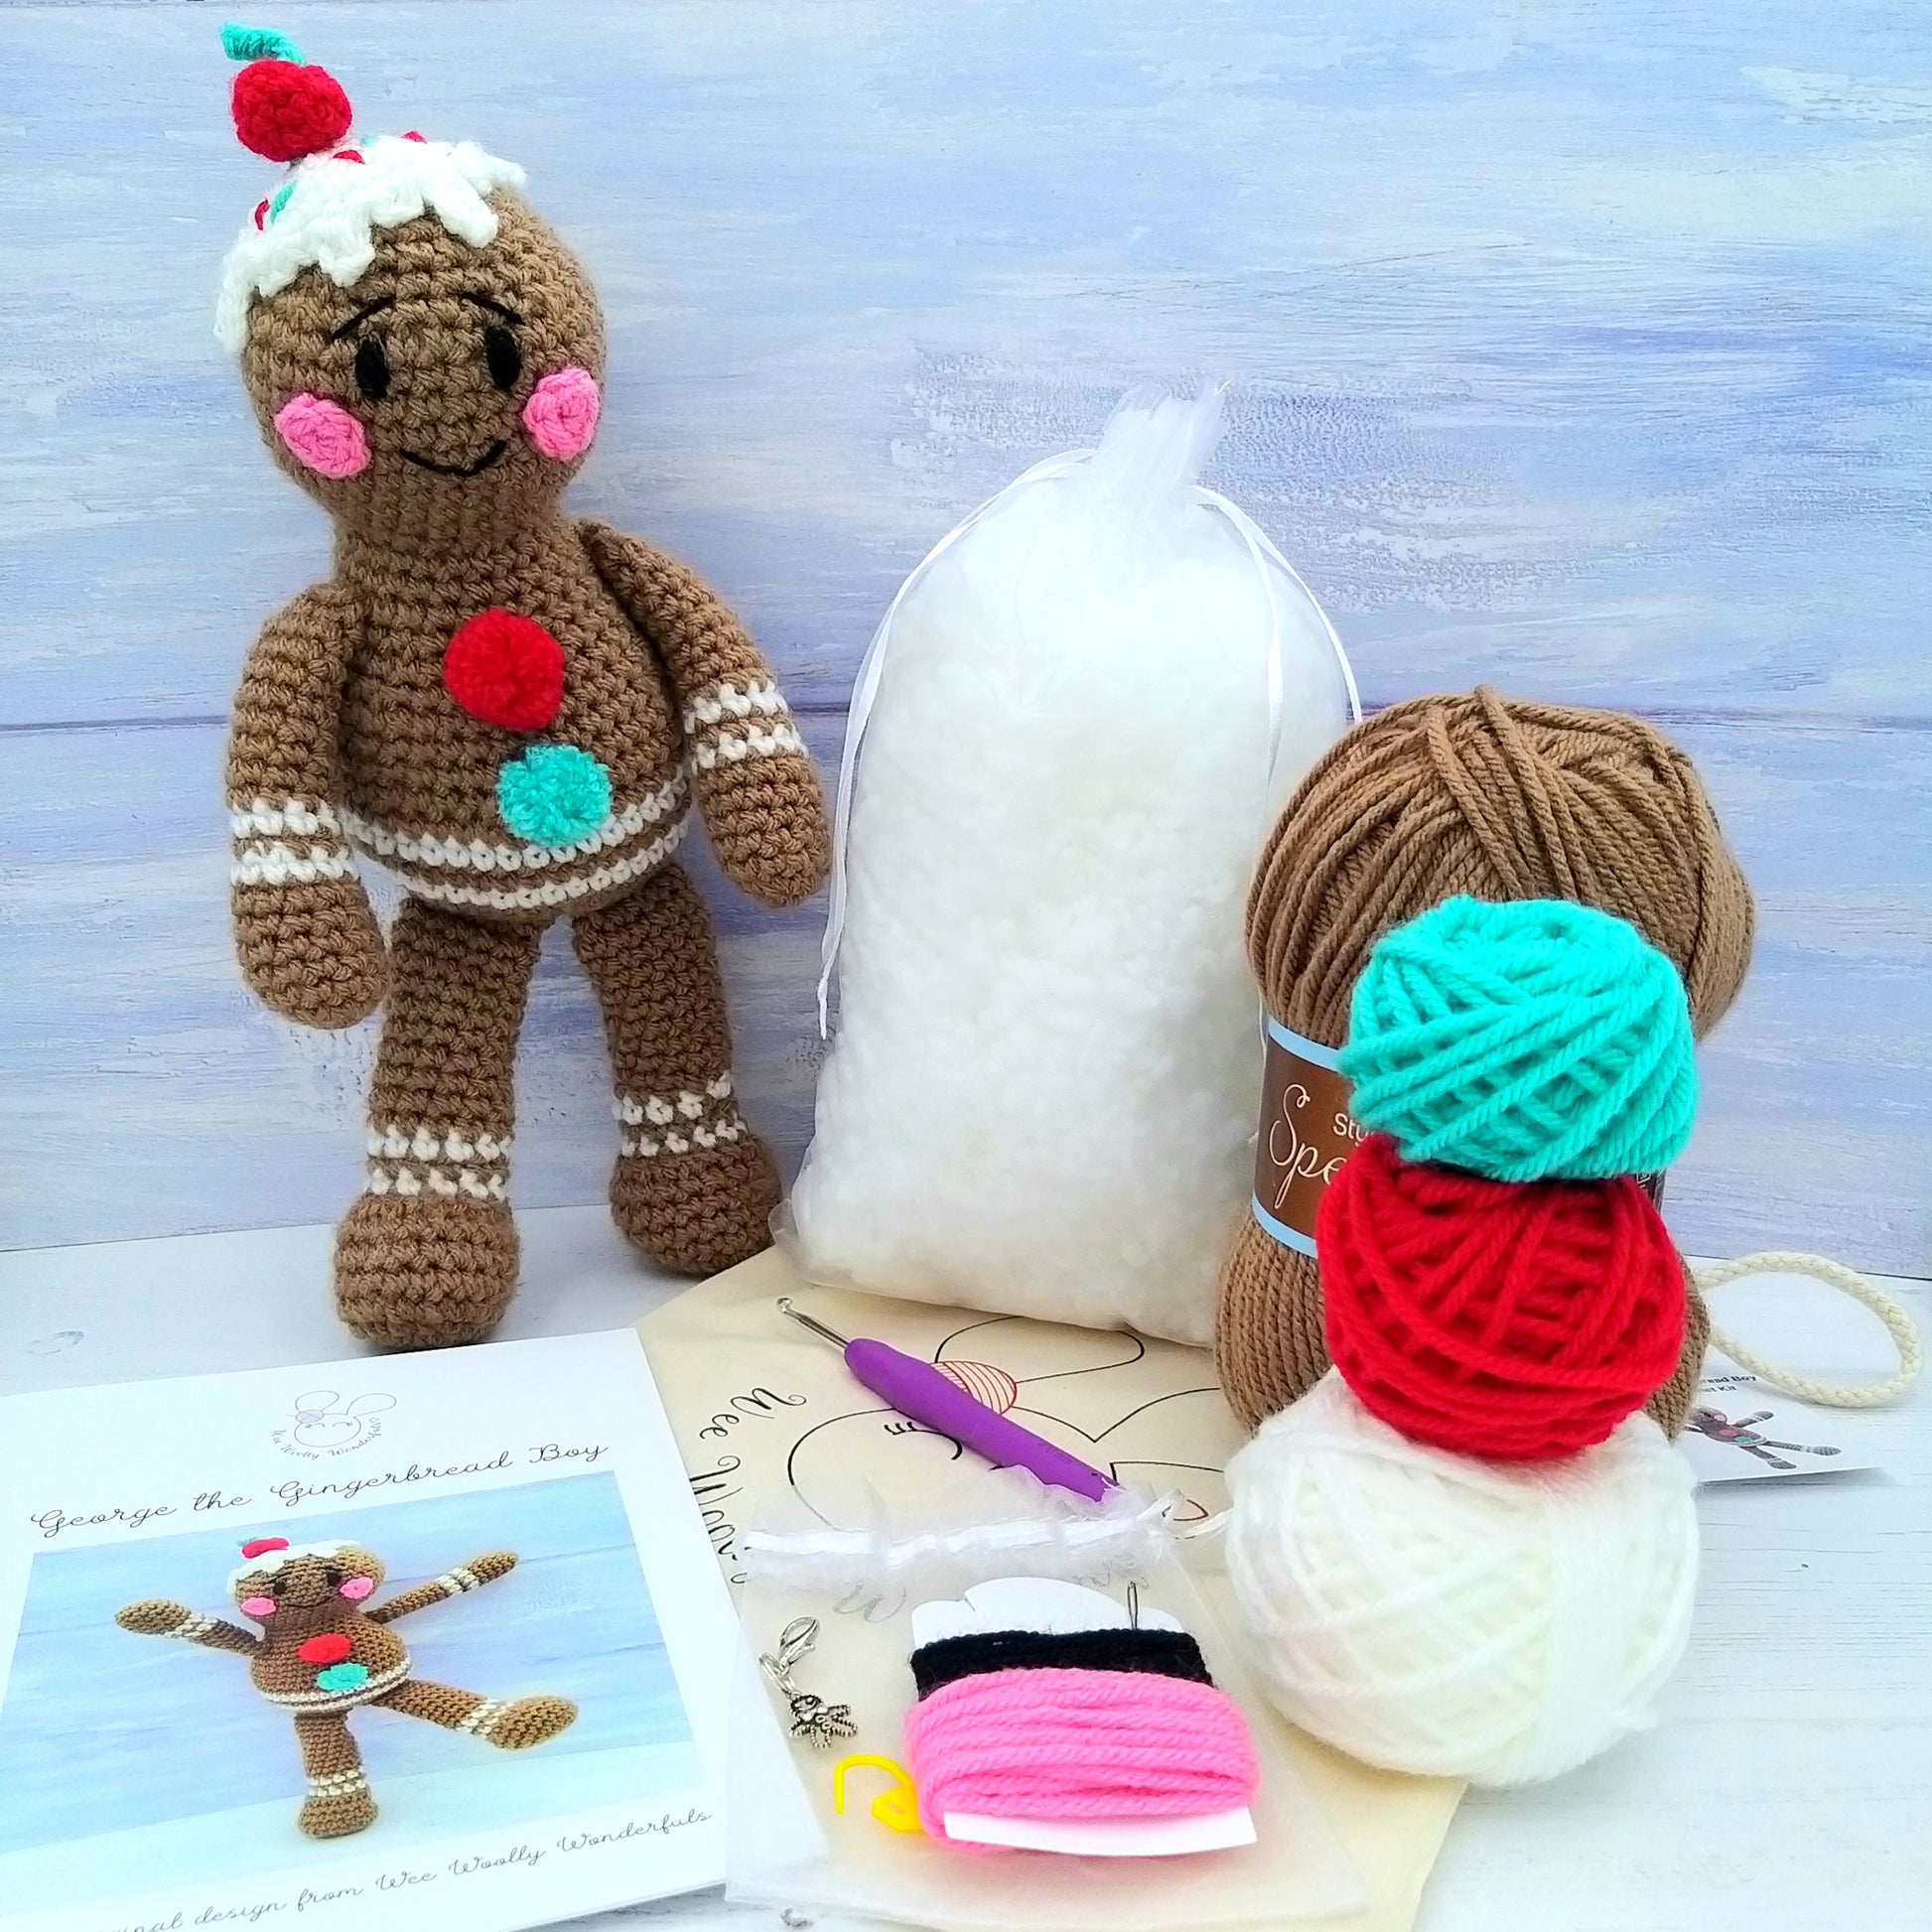 Crochet Gingerbread Man - Contents of KIt